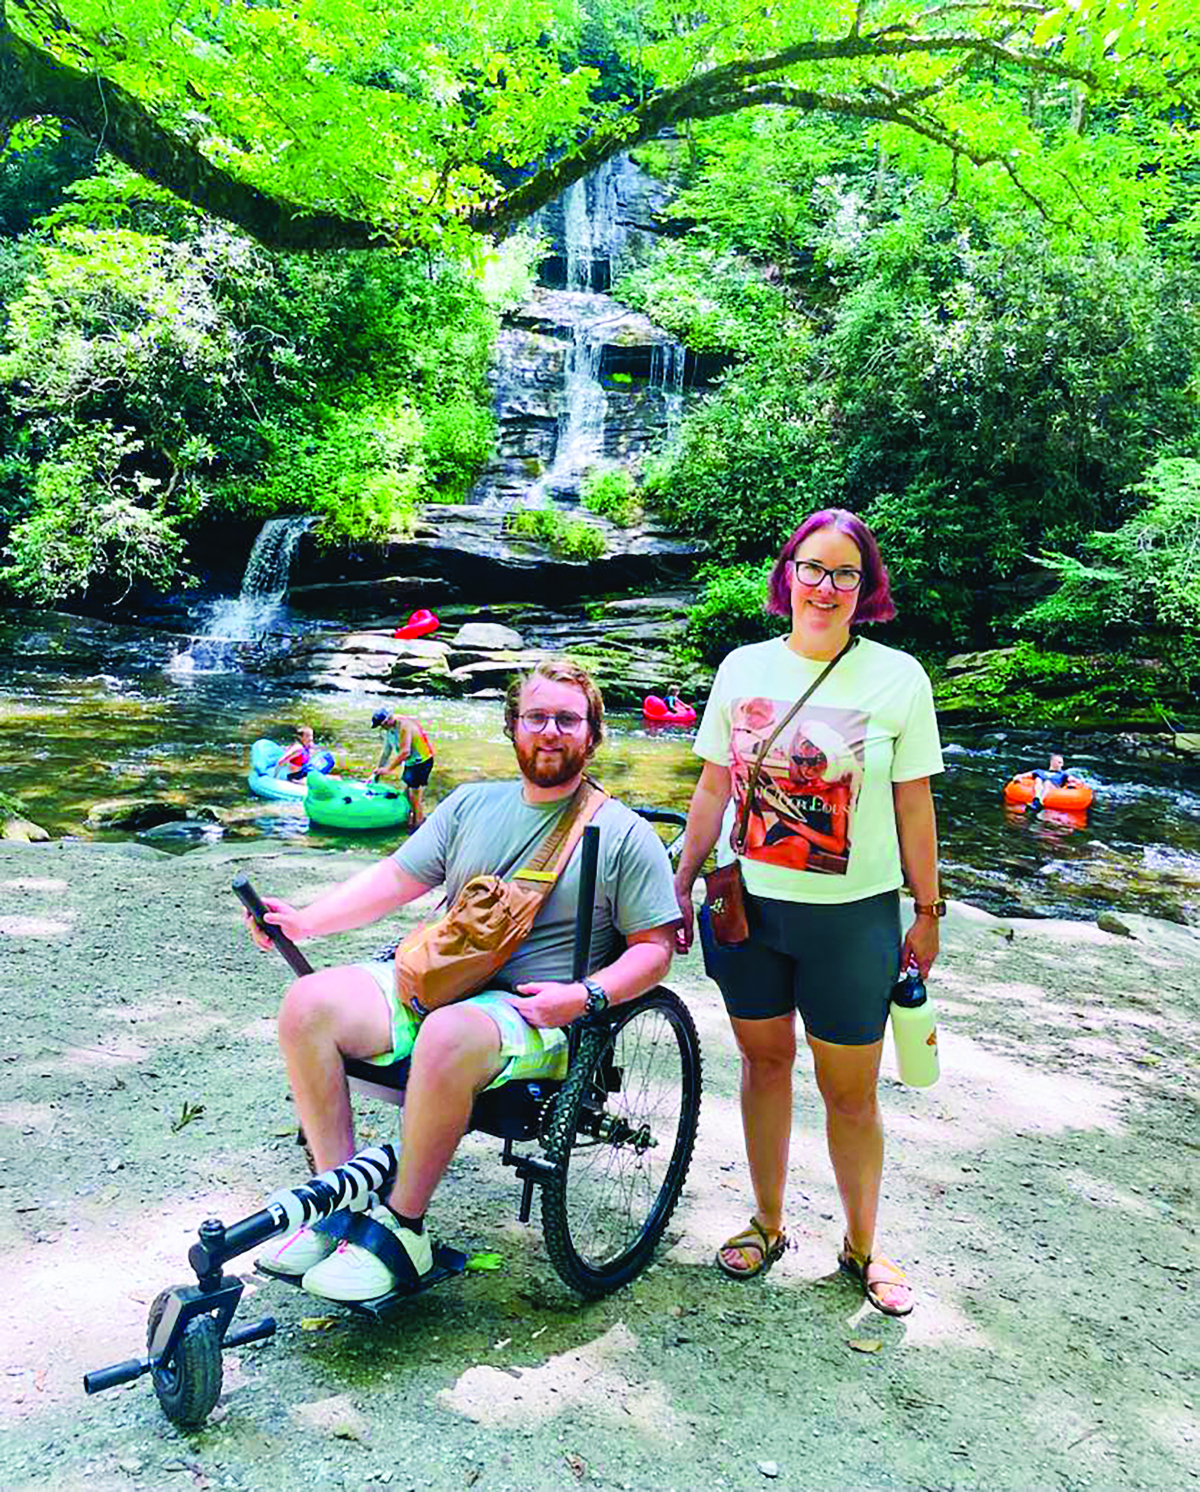 Expanding on the adaptive programs offered in Great Smoky Mountains National Park for the first time in 2023, this year’s lineup includes three opportunities for hiking, two for biking, one for kayaking and one overnight camping trip. Donated photo